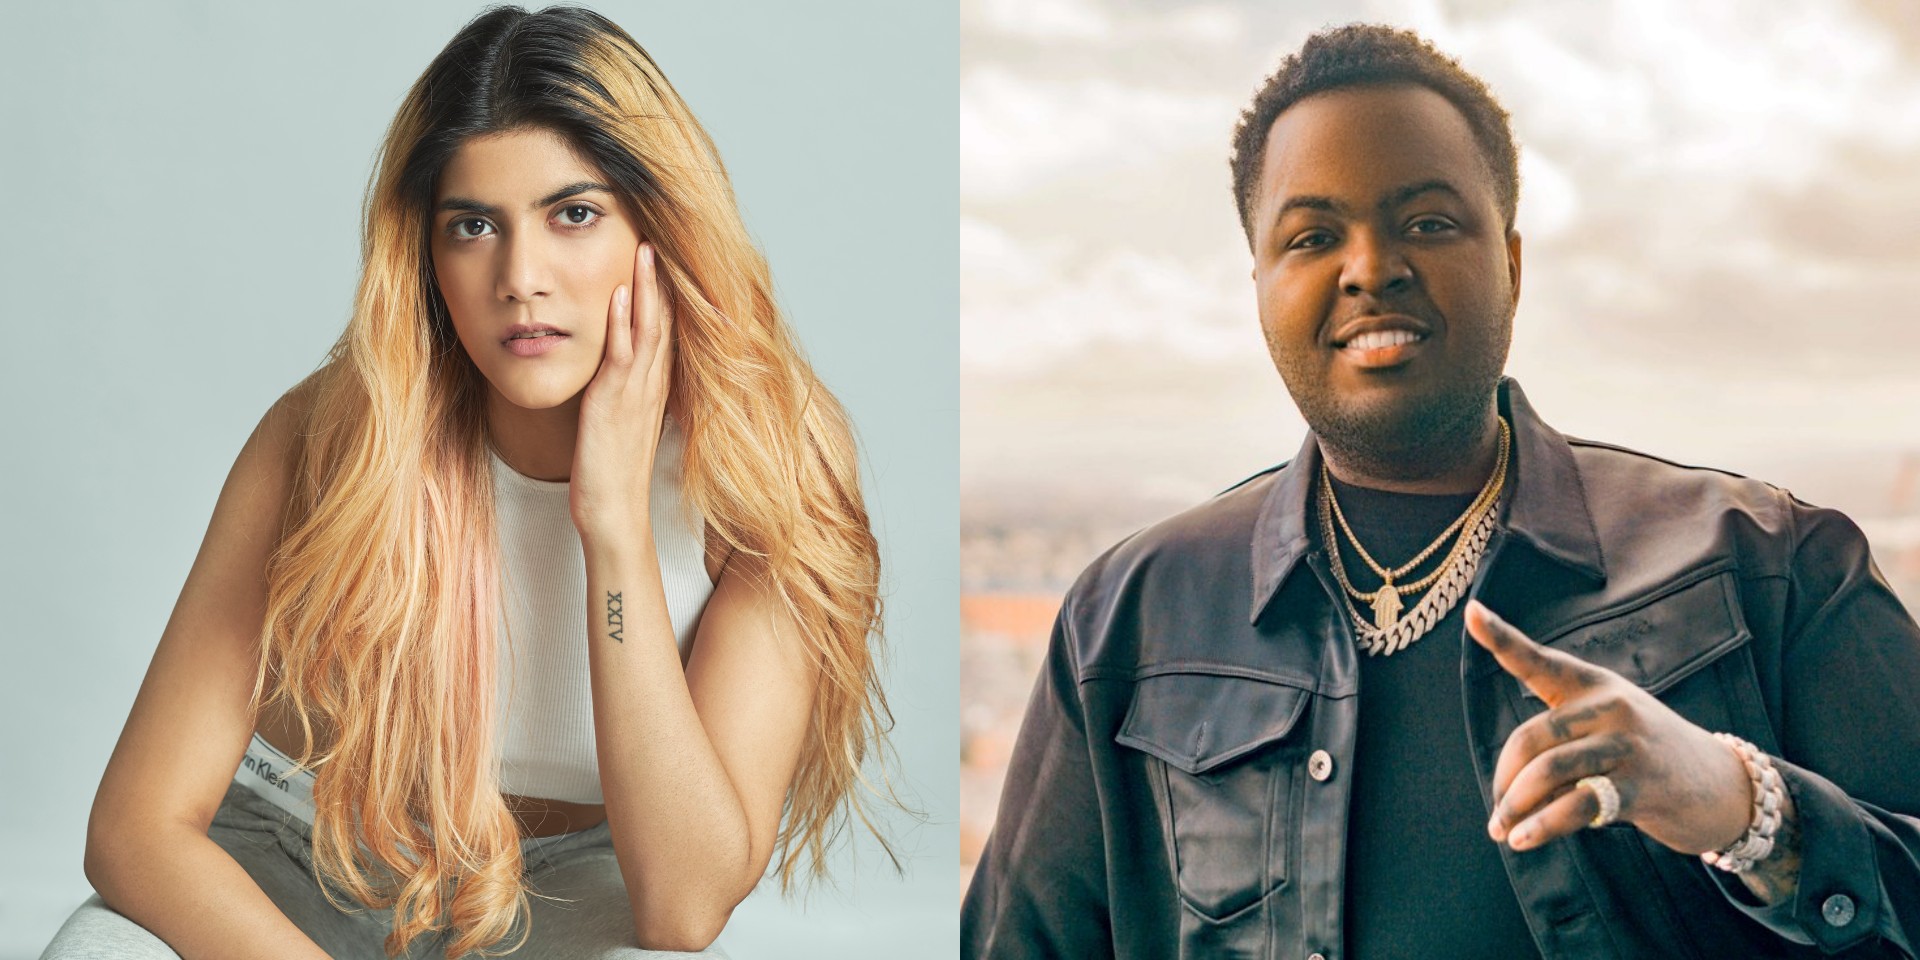 Ananya Birla joins forces with Sean Kingston on reggae-R&B single ‘Day Goes By’
